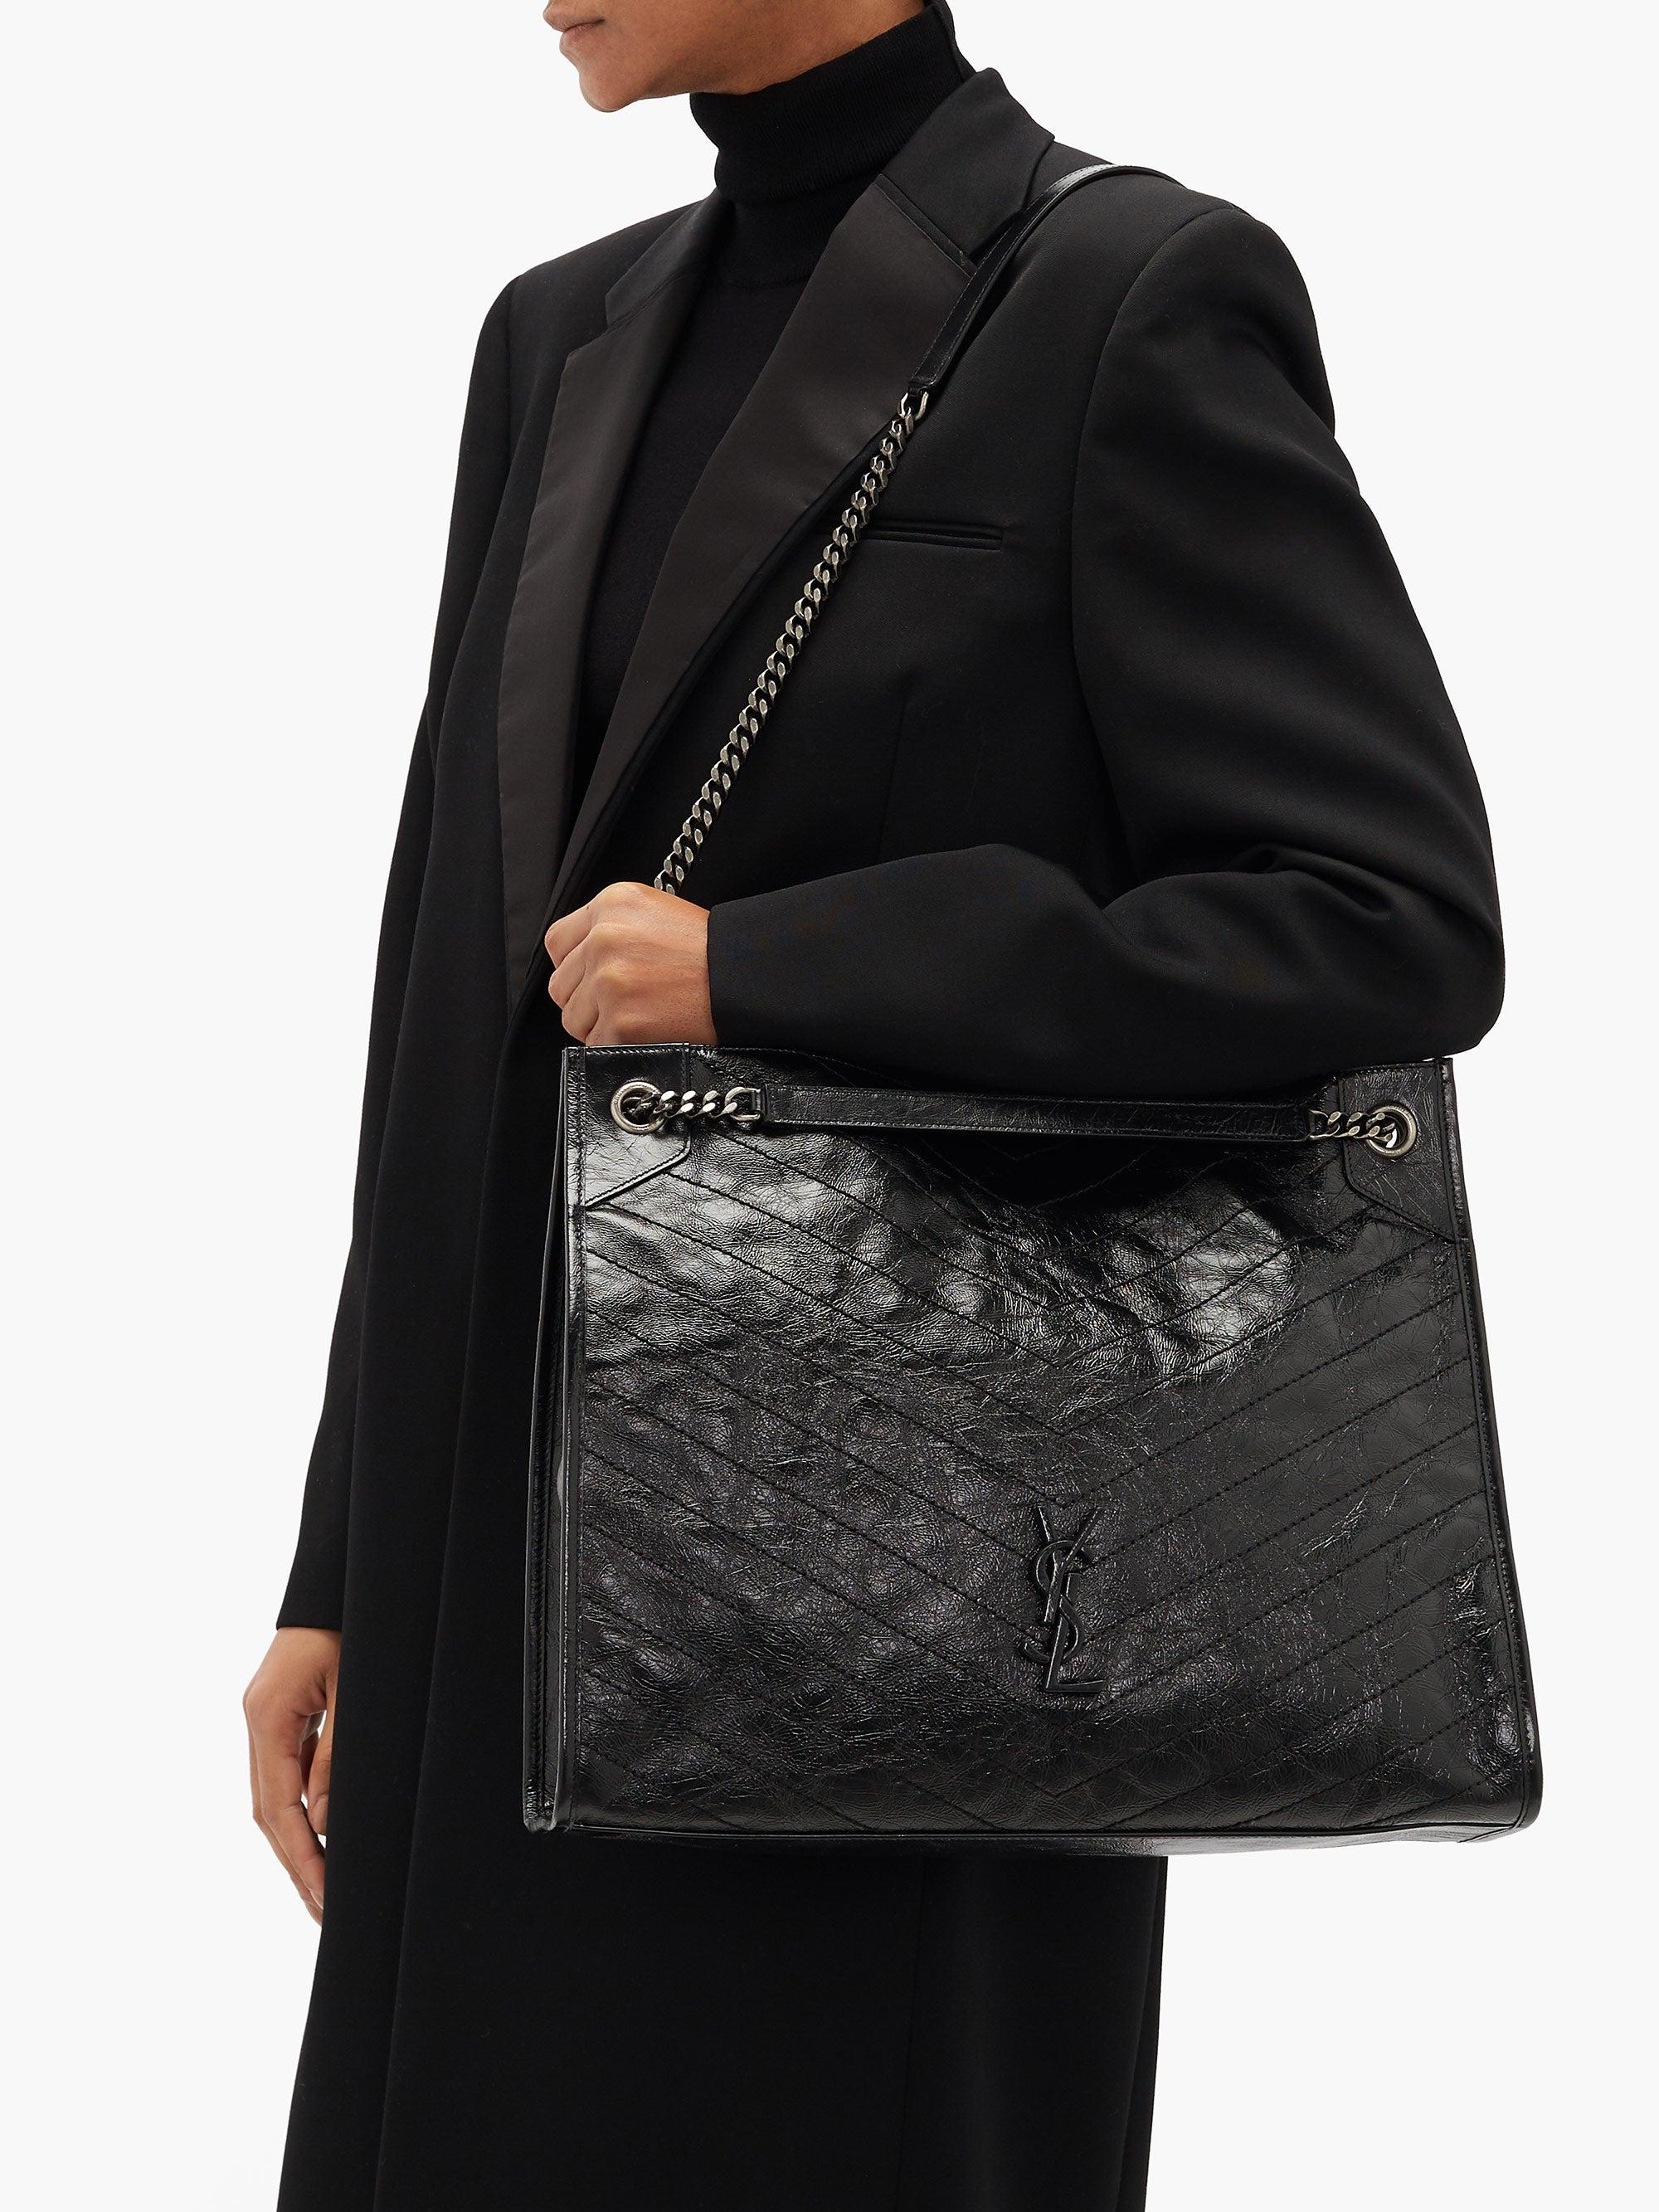 Saint Laurent Niki Large Quilted-leather Tote Bag in Black | Lyst